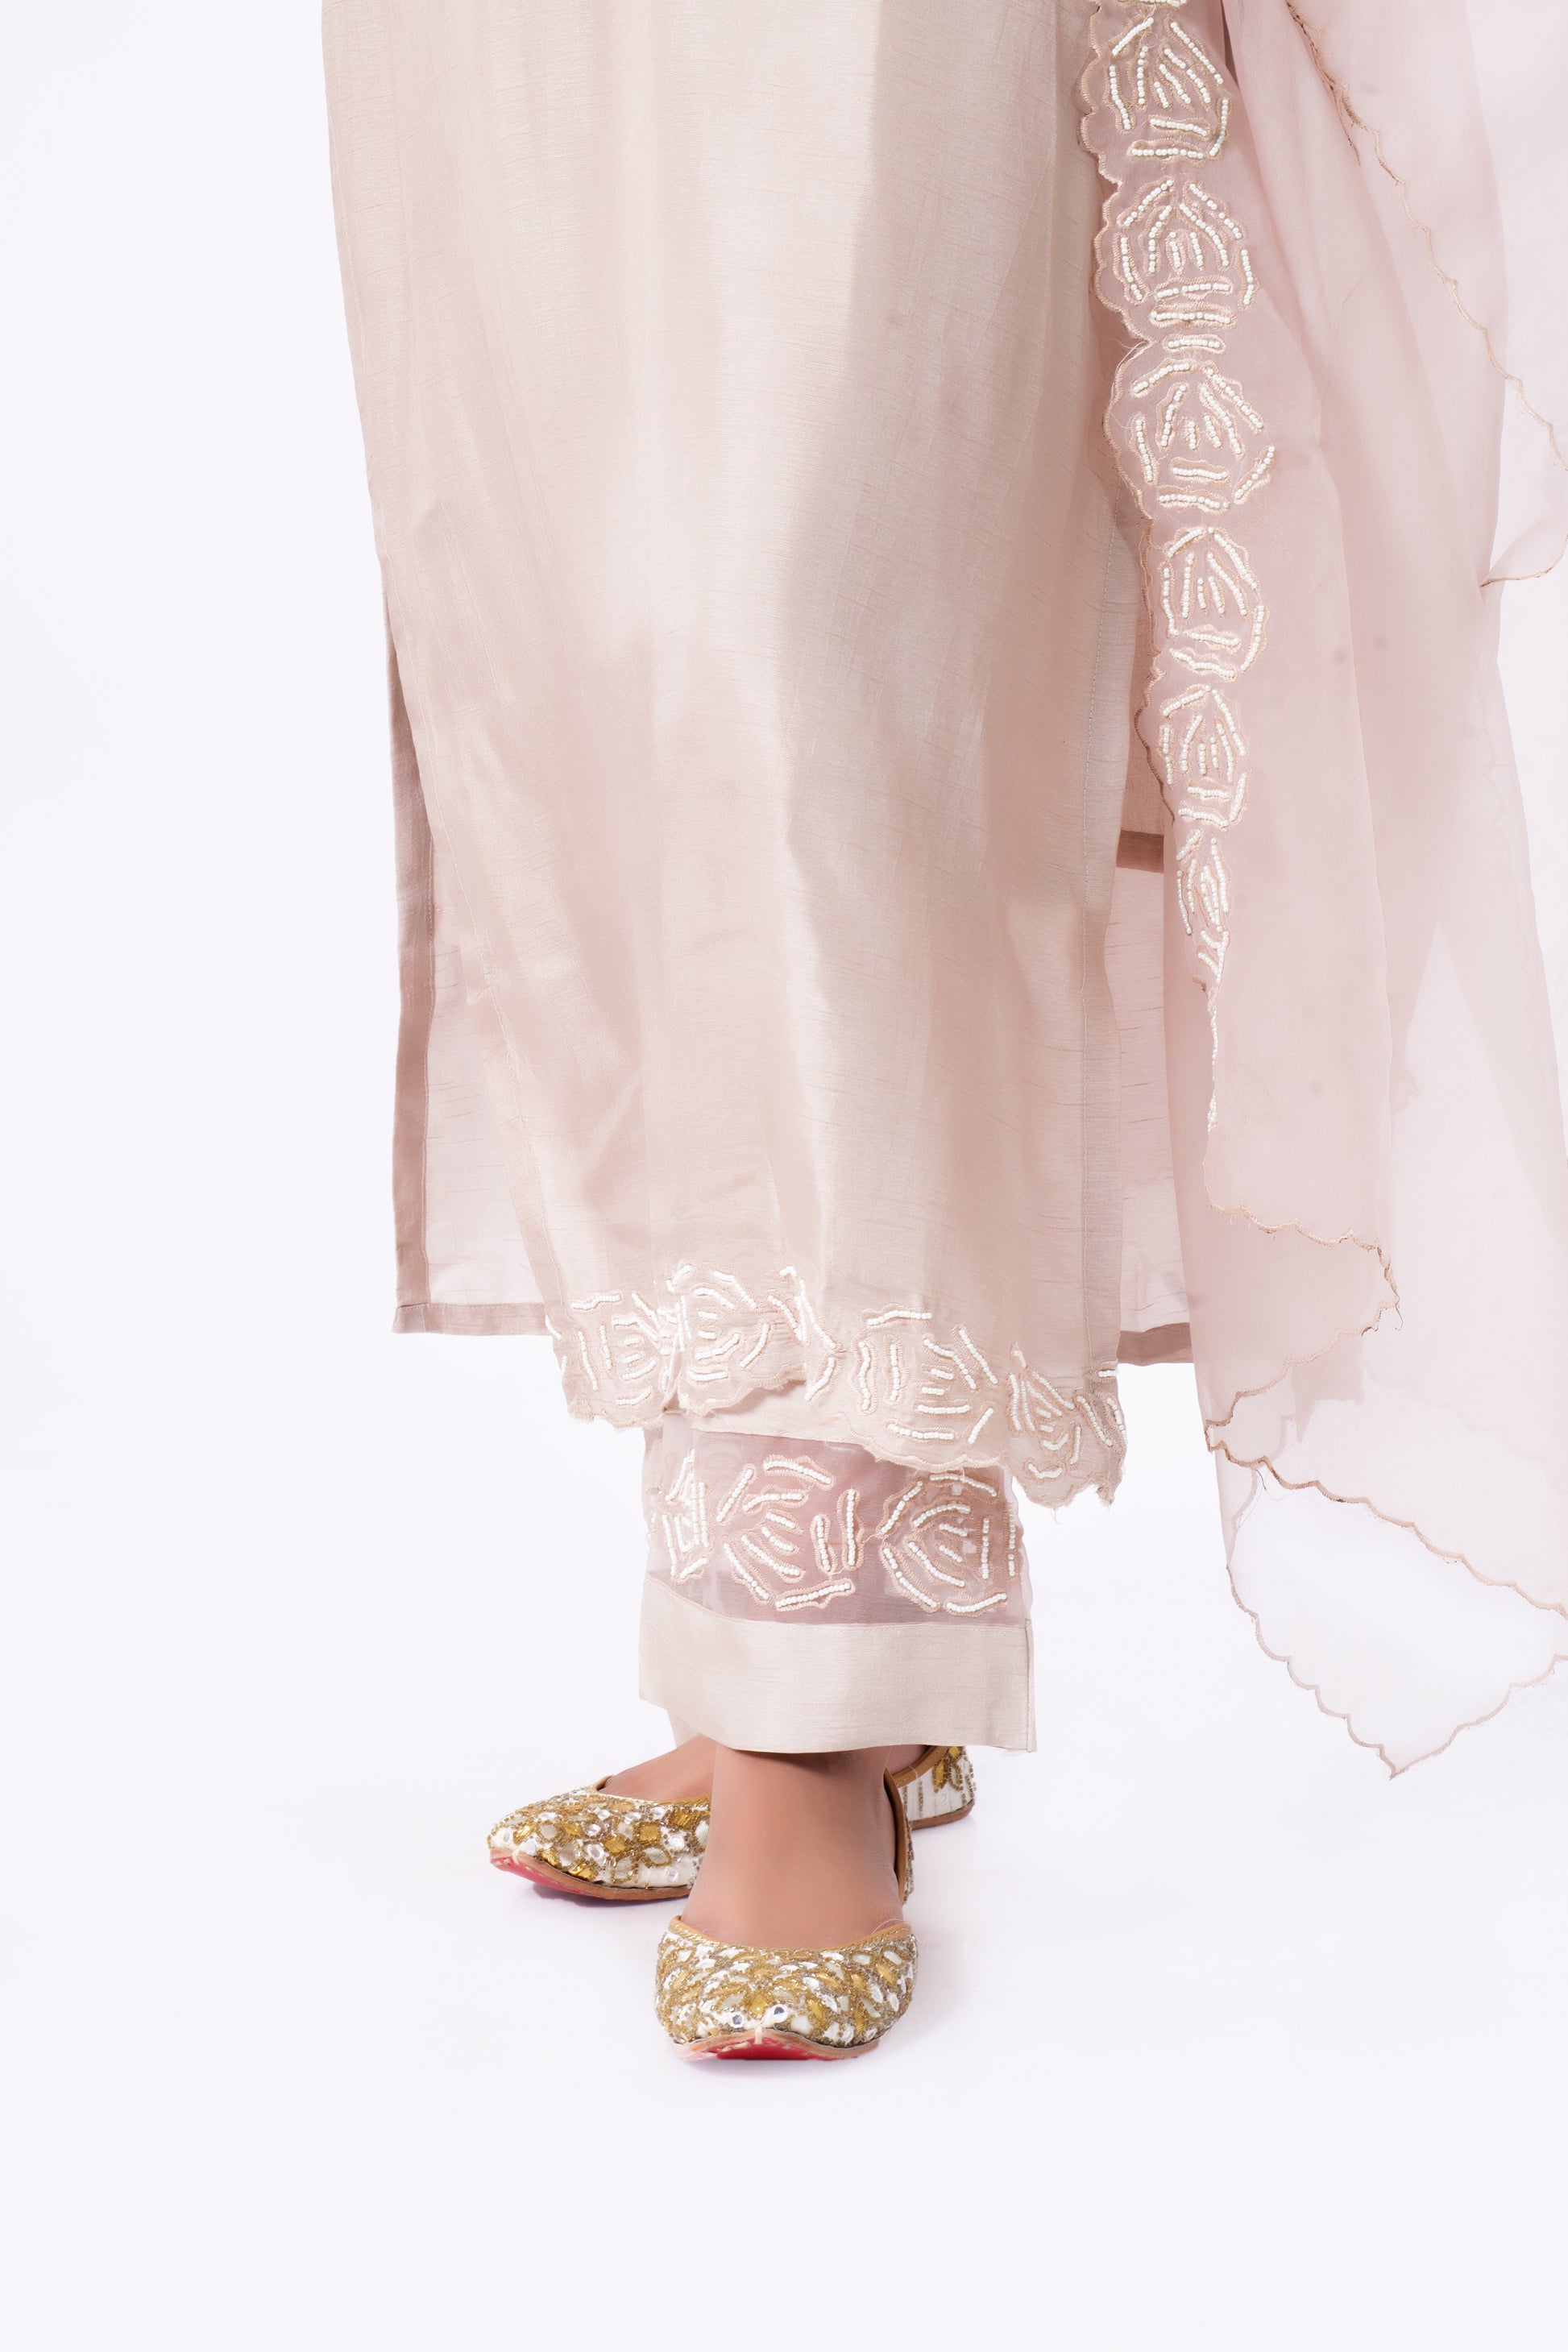 Straight Kurta Set with Organza Dupatta is made from luxurious Dola Silk and Pearl Hand Embroidery in Light Brown Colour